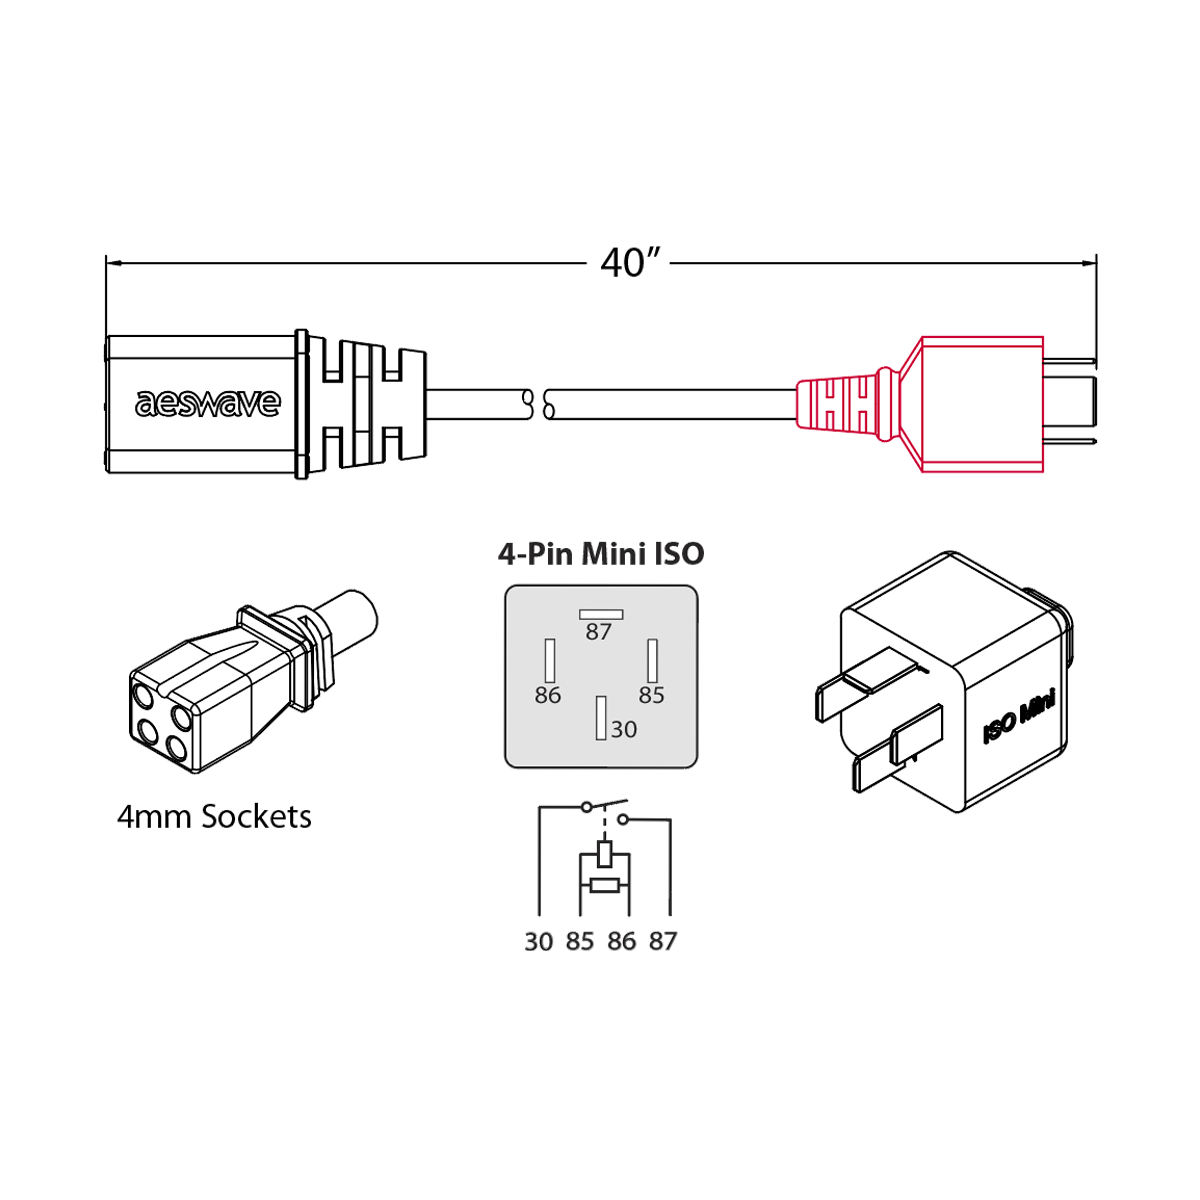 uActivate 4-Pin ISO Mini Type B Cable Specifications